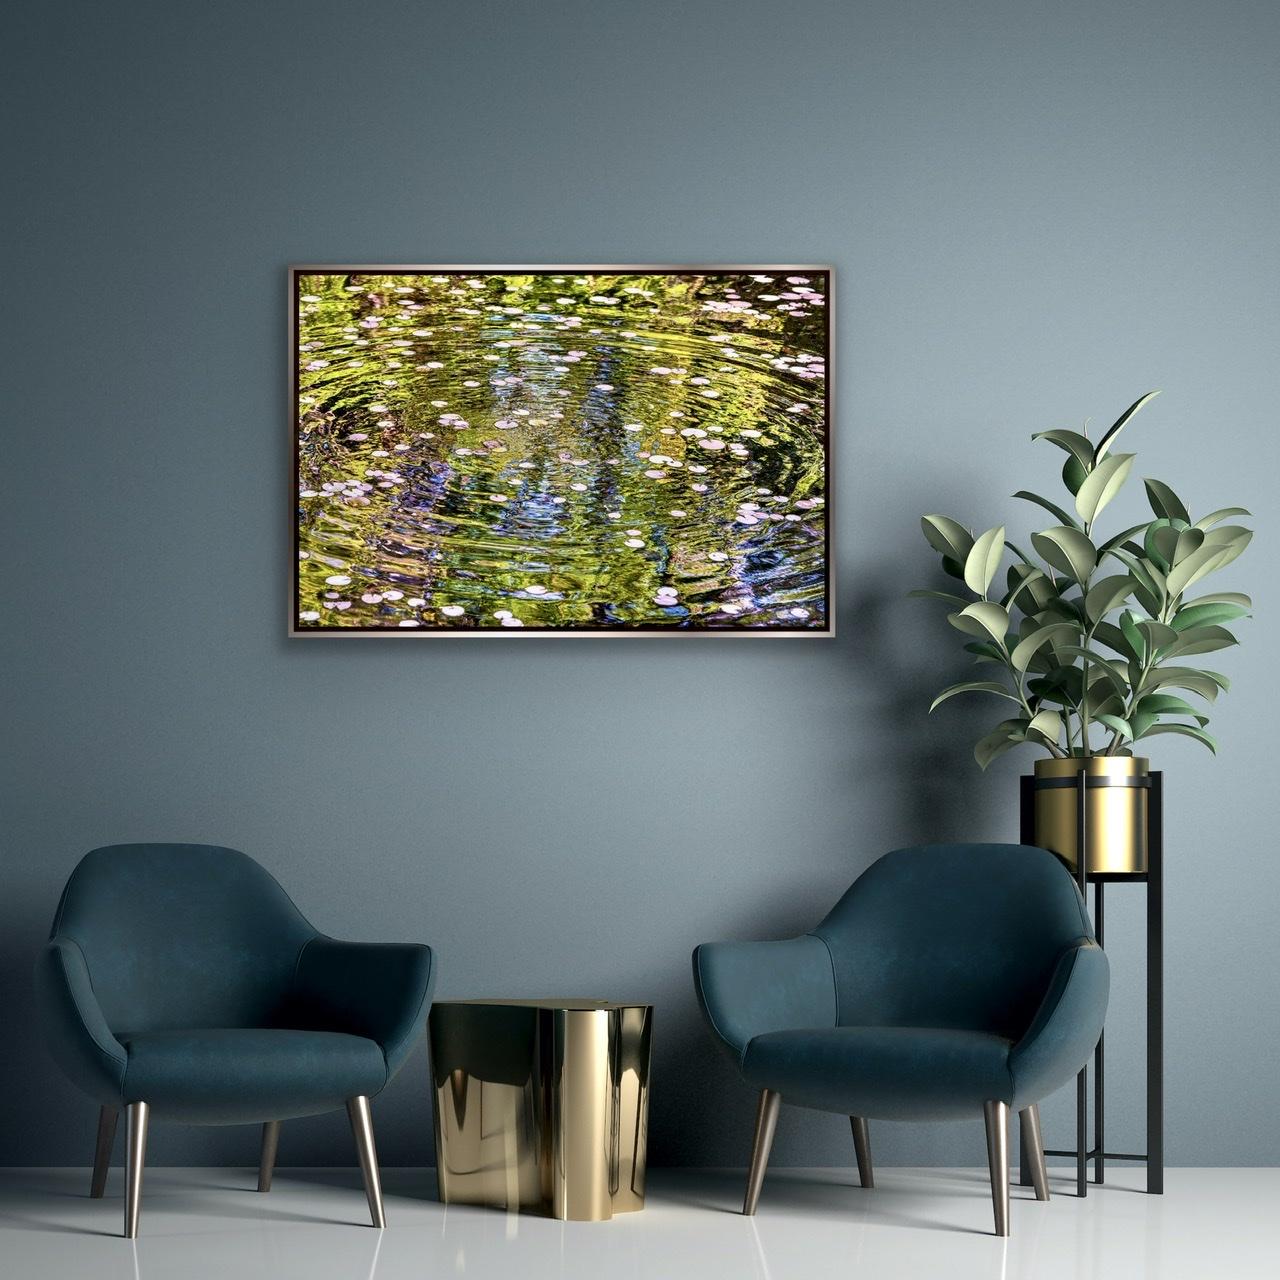 Shot at Trout Pond outside of Sag Harbor, for me this photo embodies the fresh promise of spring.

Fine art photo mounted on di-bond aluminum. Custom printing/mounting/framing options available upon request. 